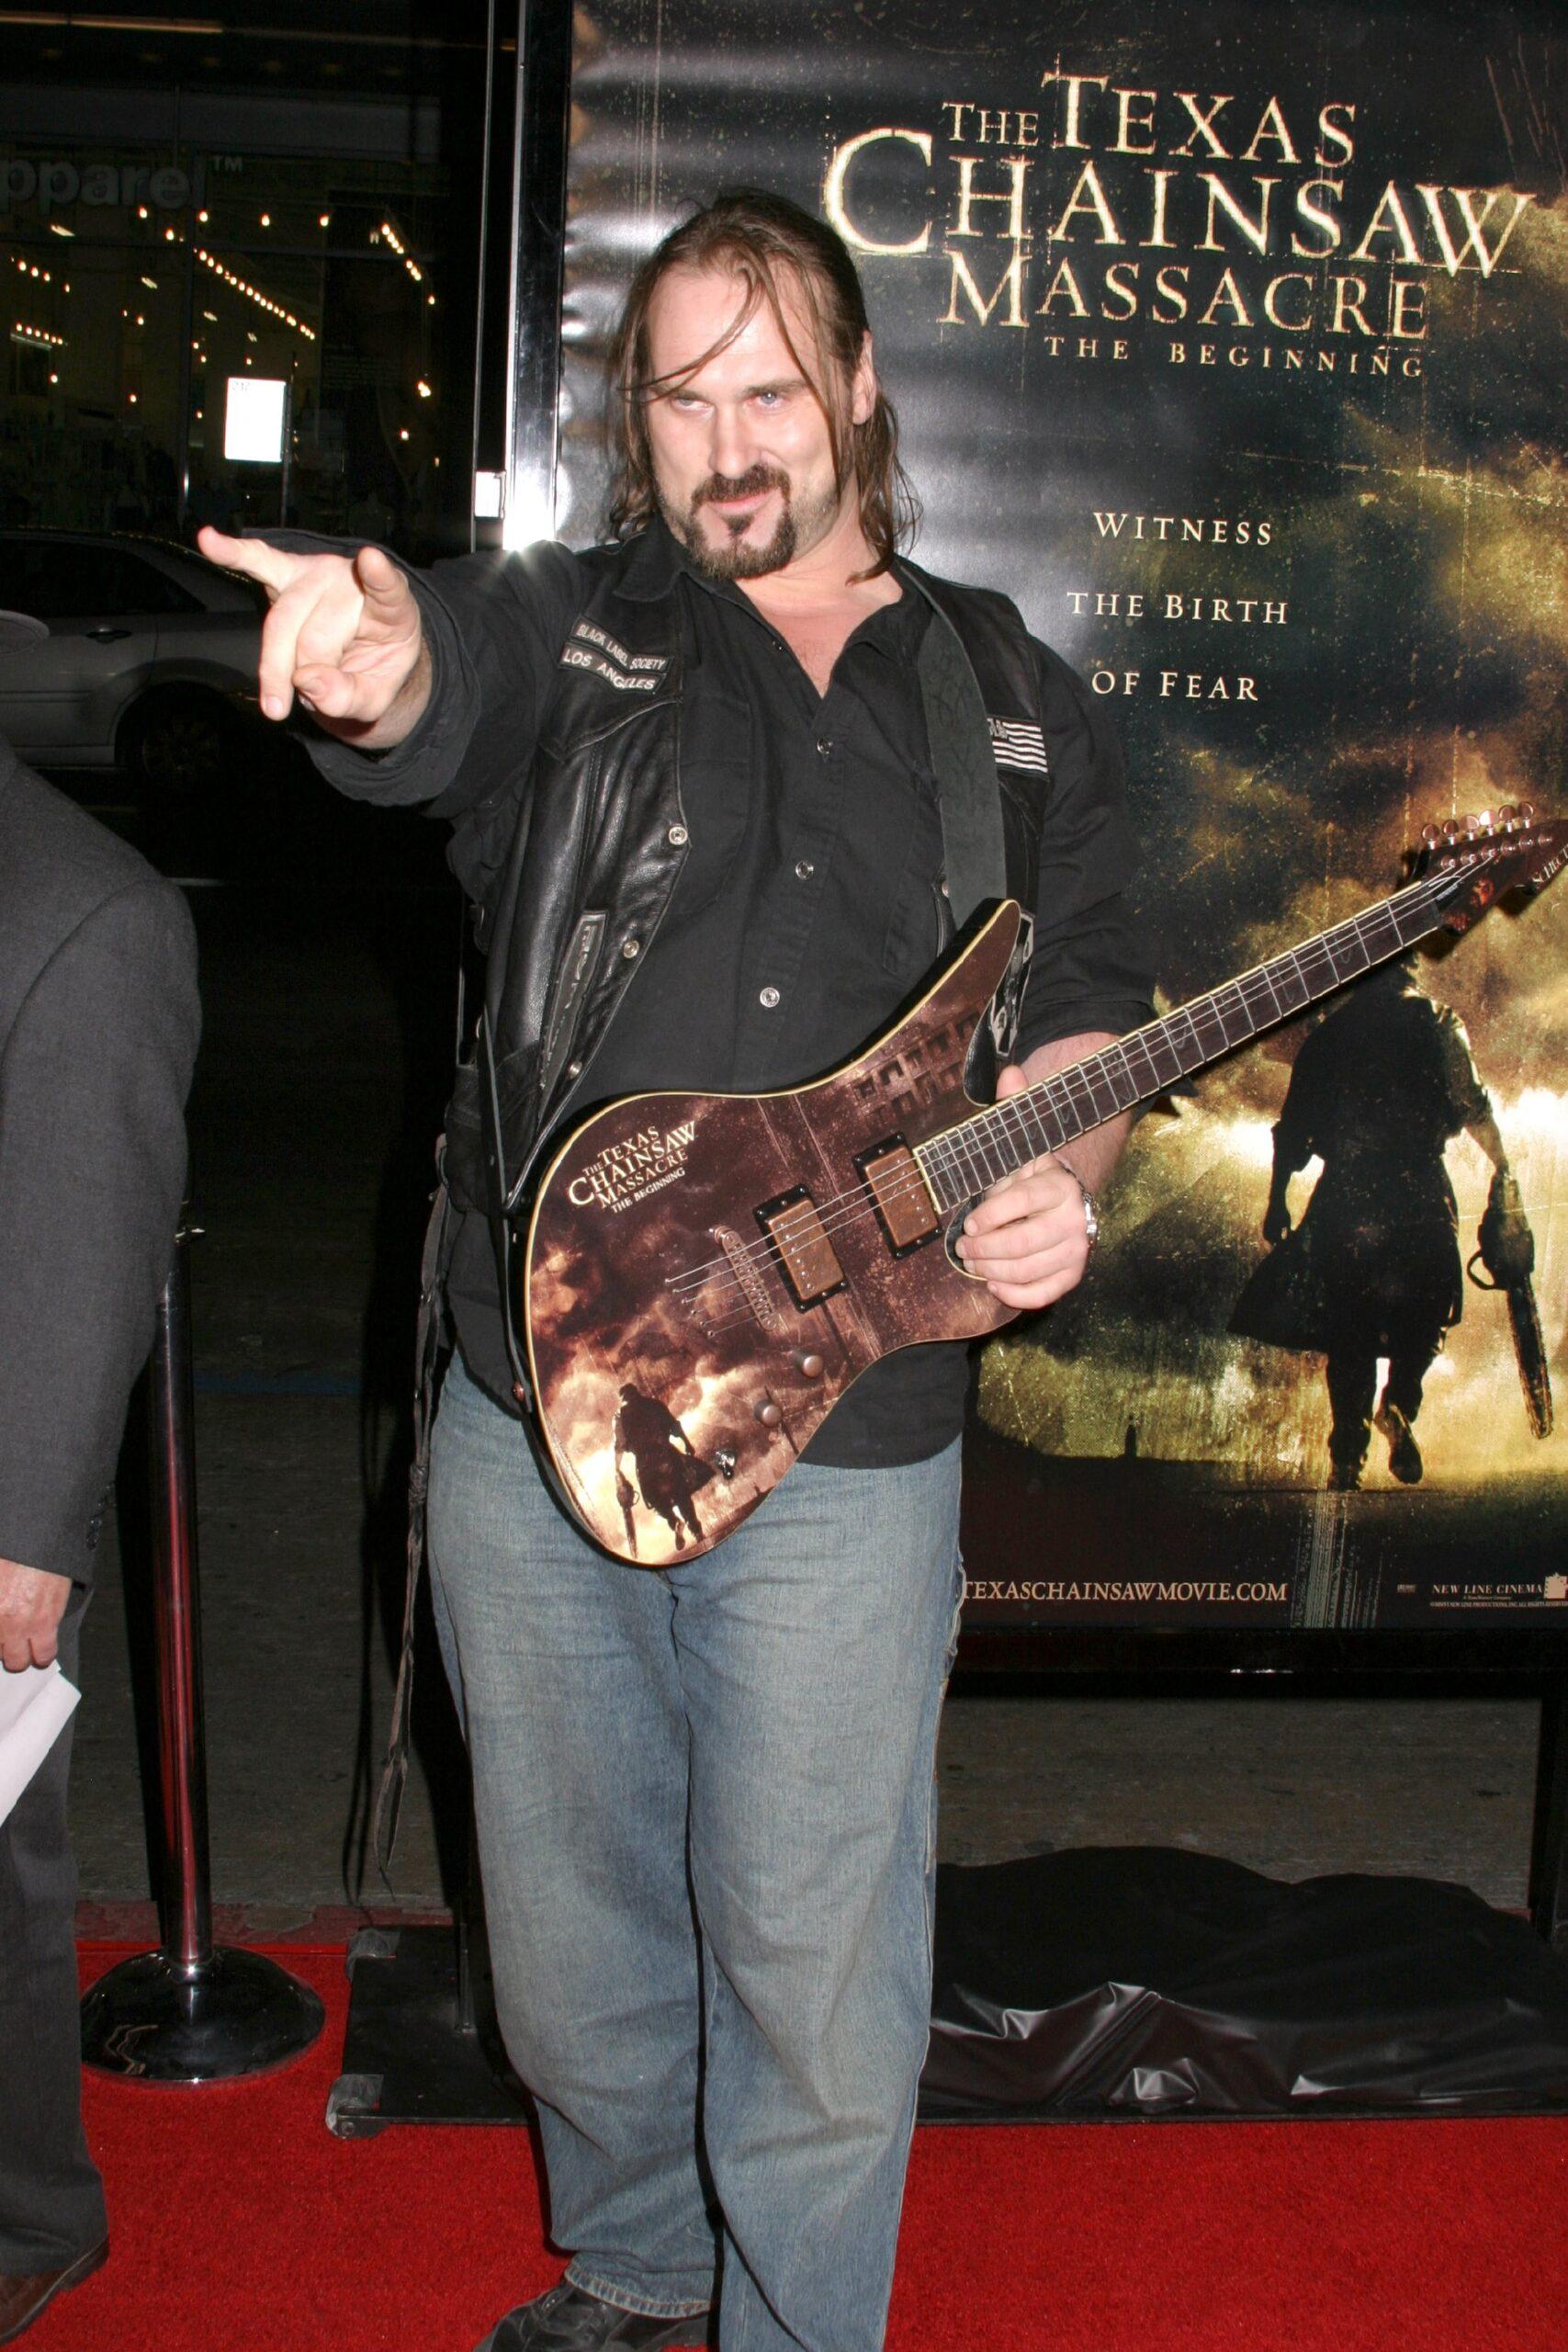 Andrew Bryniarski at 'The Texas Chainsaw Massacre: The Beginning' premiere